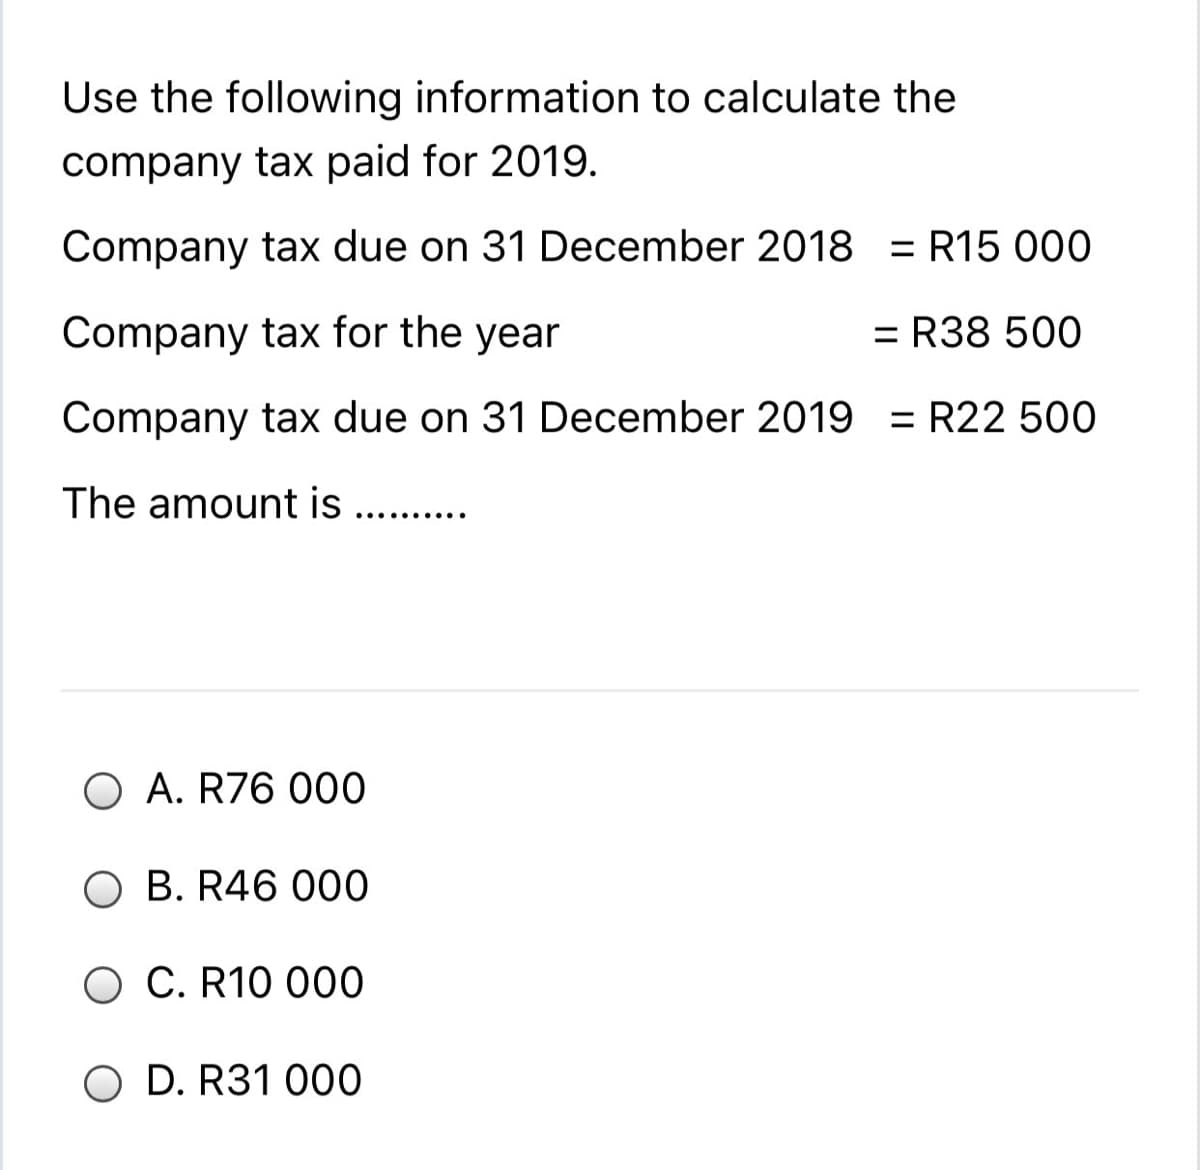 Use the following information to calculate the
company tax paid for 2019.
Company tax due on 31 December 2018 = R15 000
Company tax for the year
= R38 500
Company tax due on 31 December 2019 = R22 500
The amount is ..
.... ......
O A. R76 000
O B. R46 000
C. R10 000
O D. R31 000
